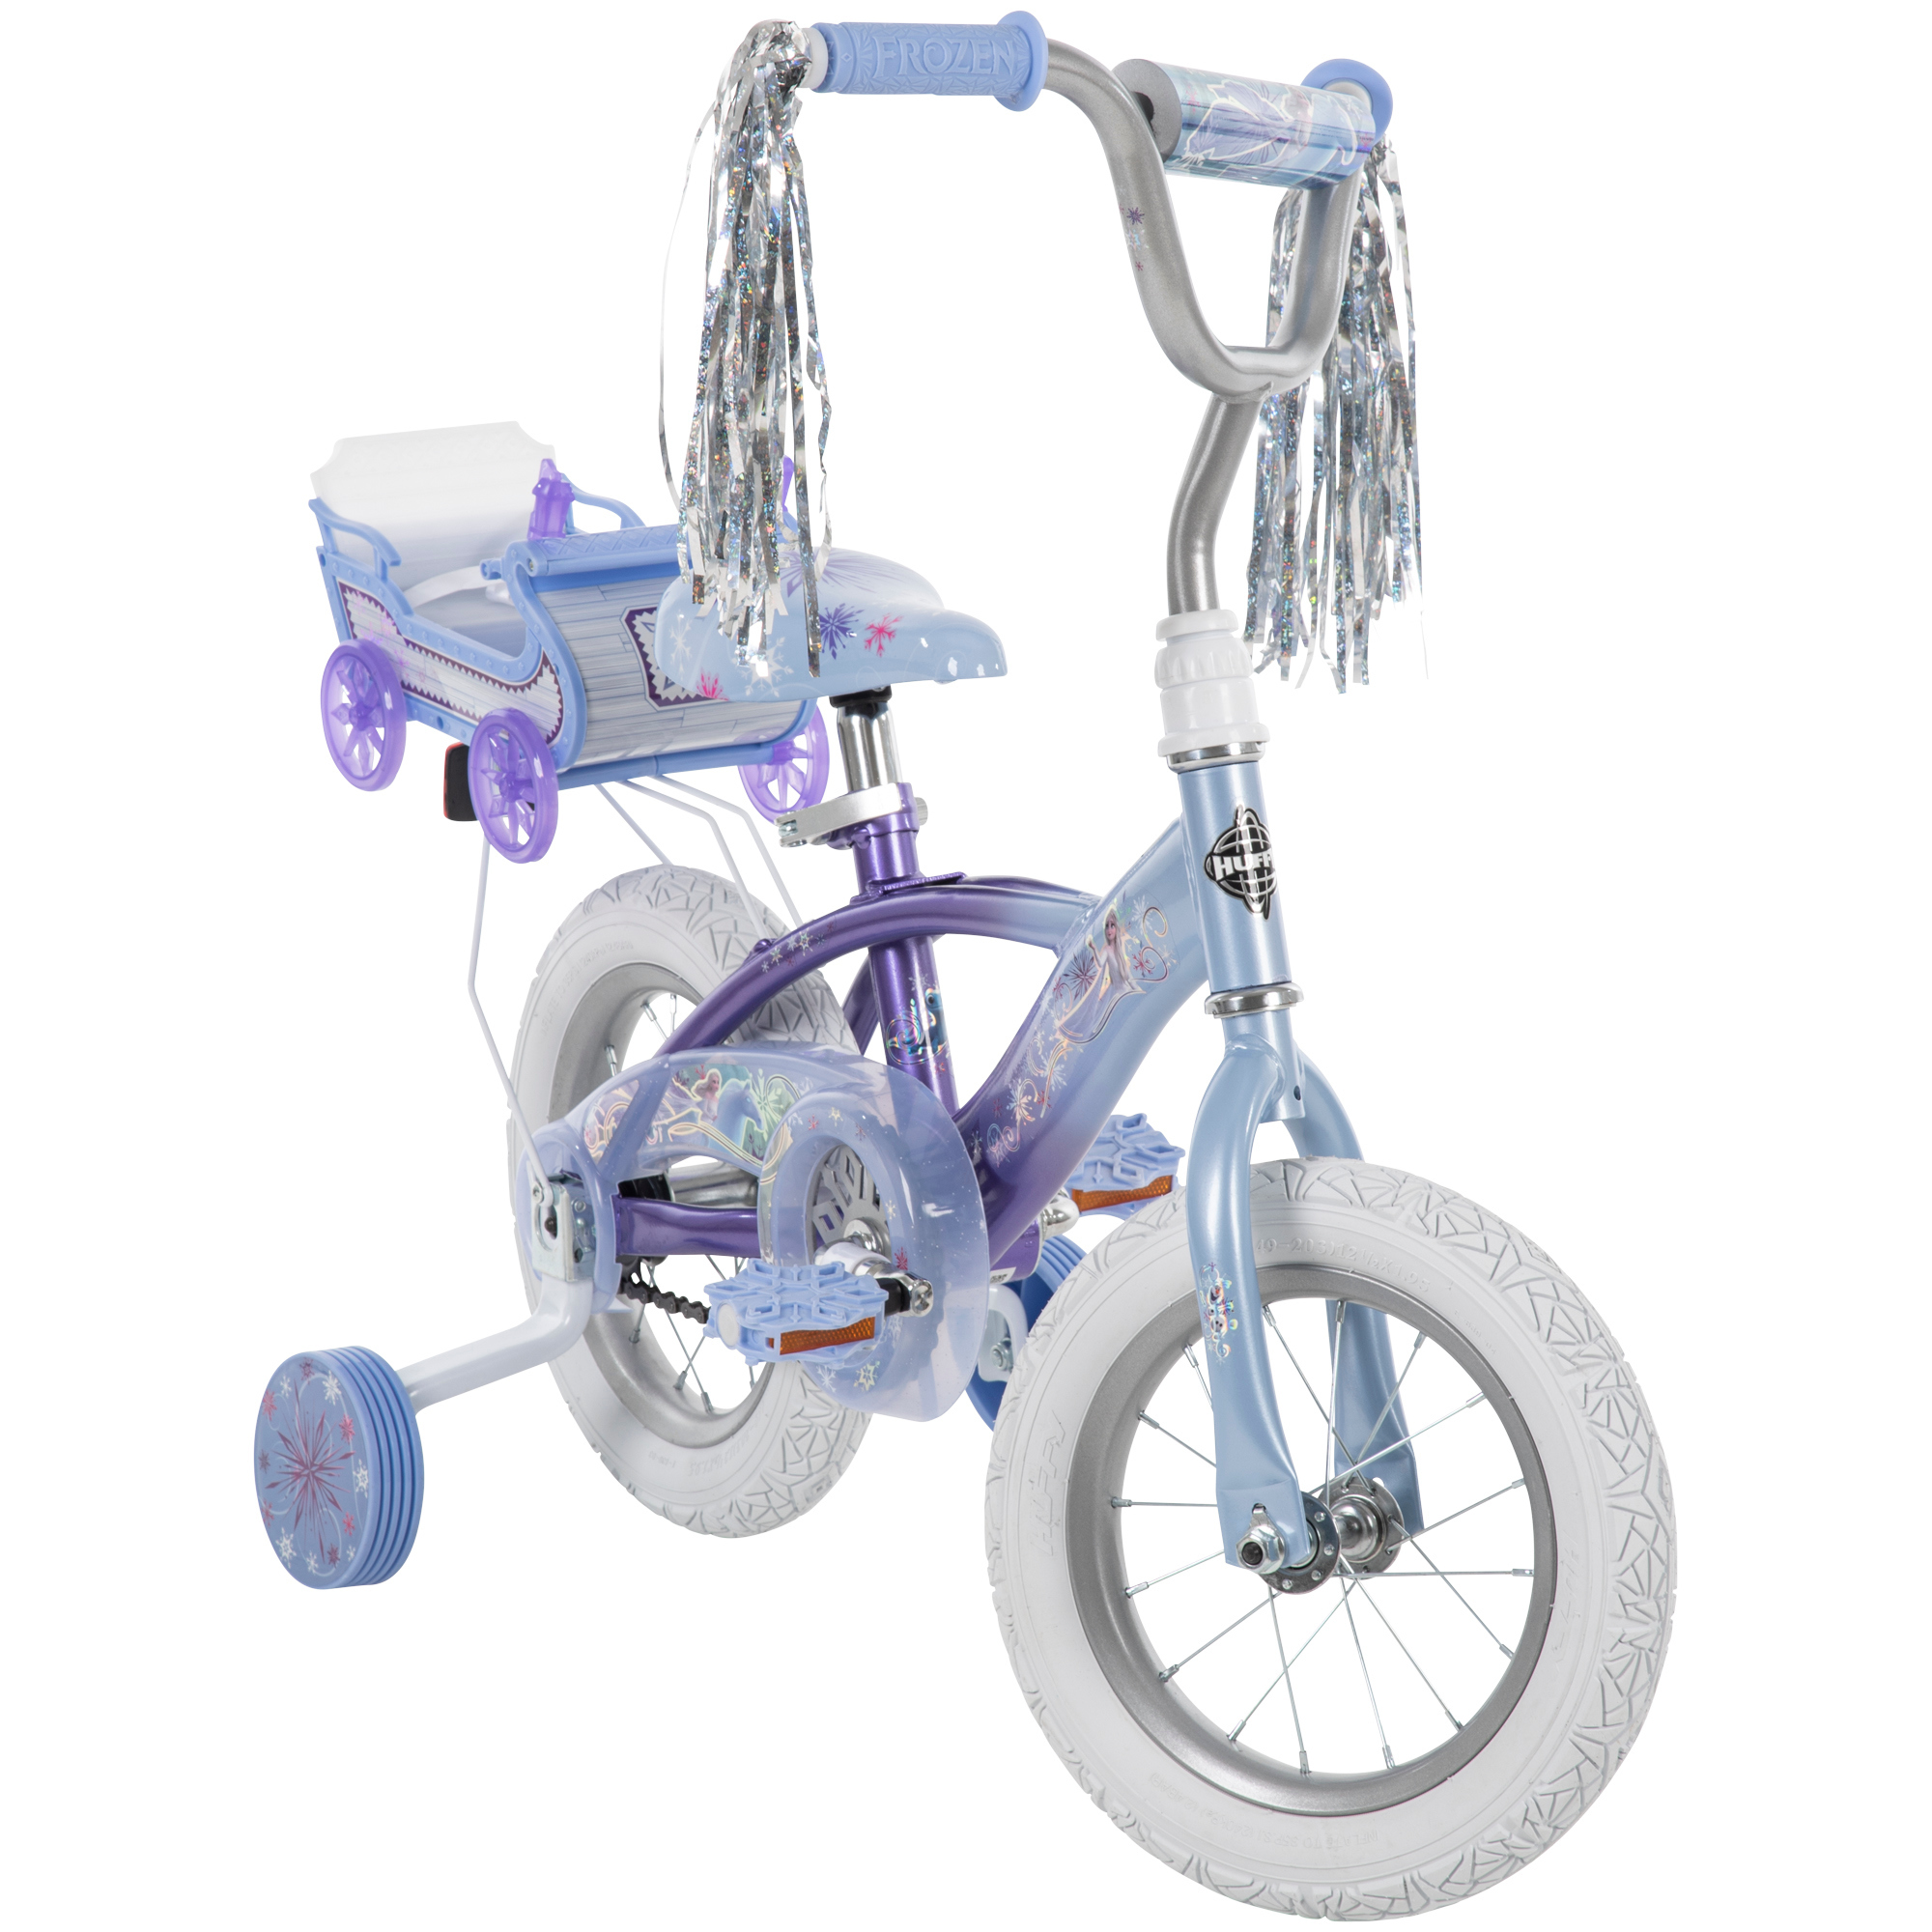 Disney Frozen 12 in. Bike with Doll Carrier Sleigh for Girl's, Ages 2+ Years, White and Purple by Huffy - image 15 of 19